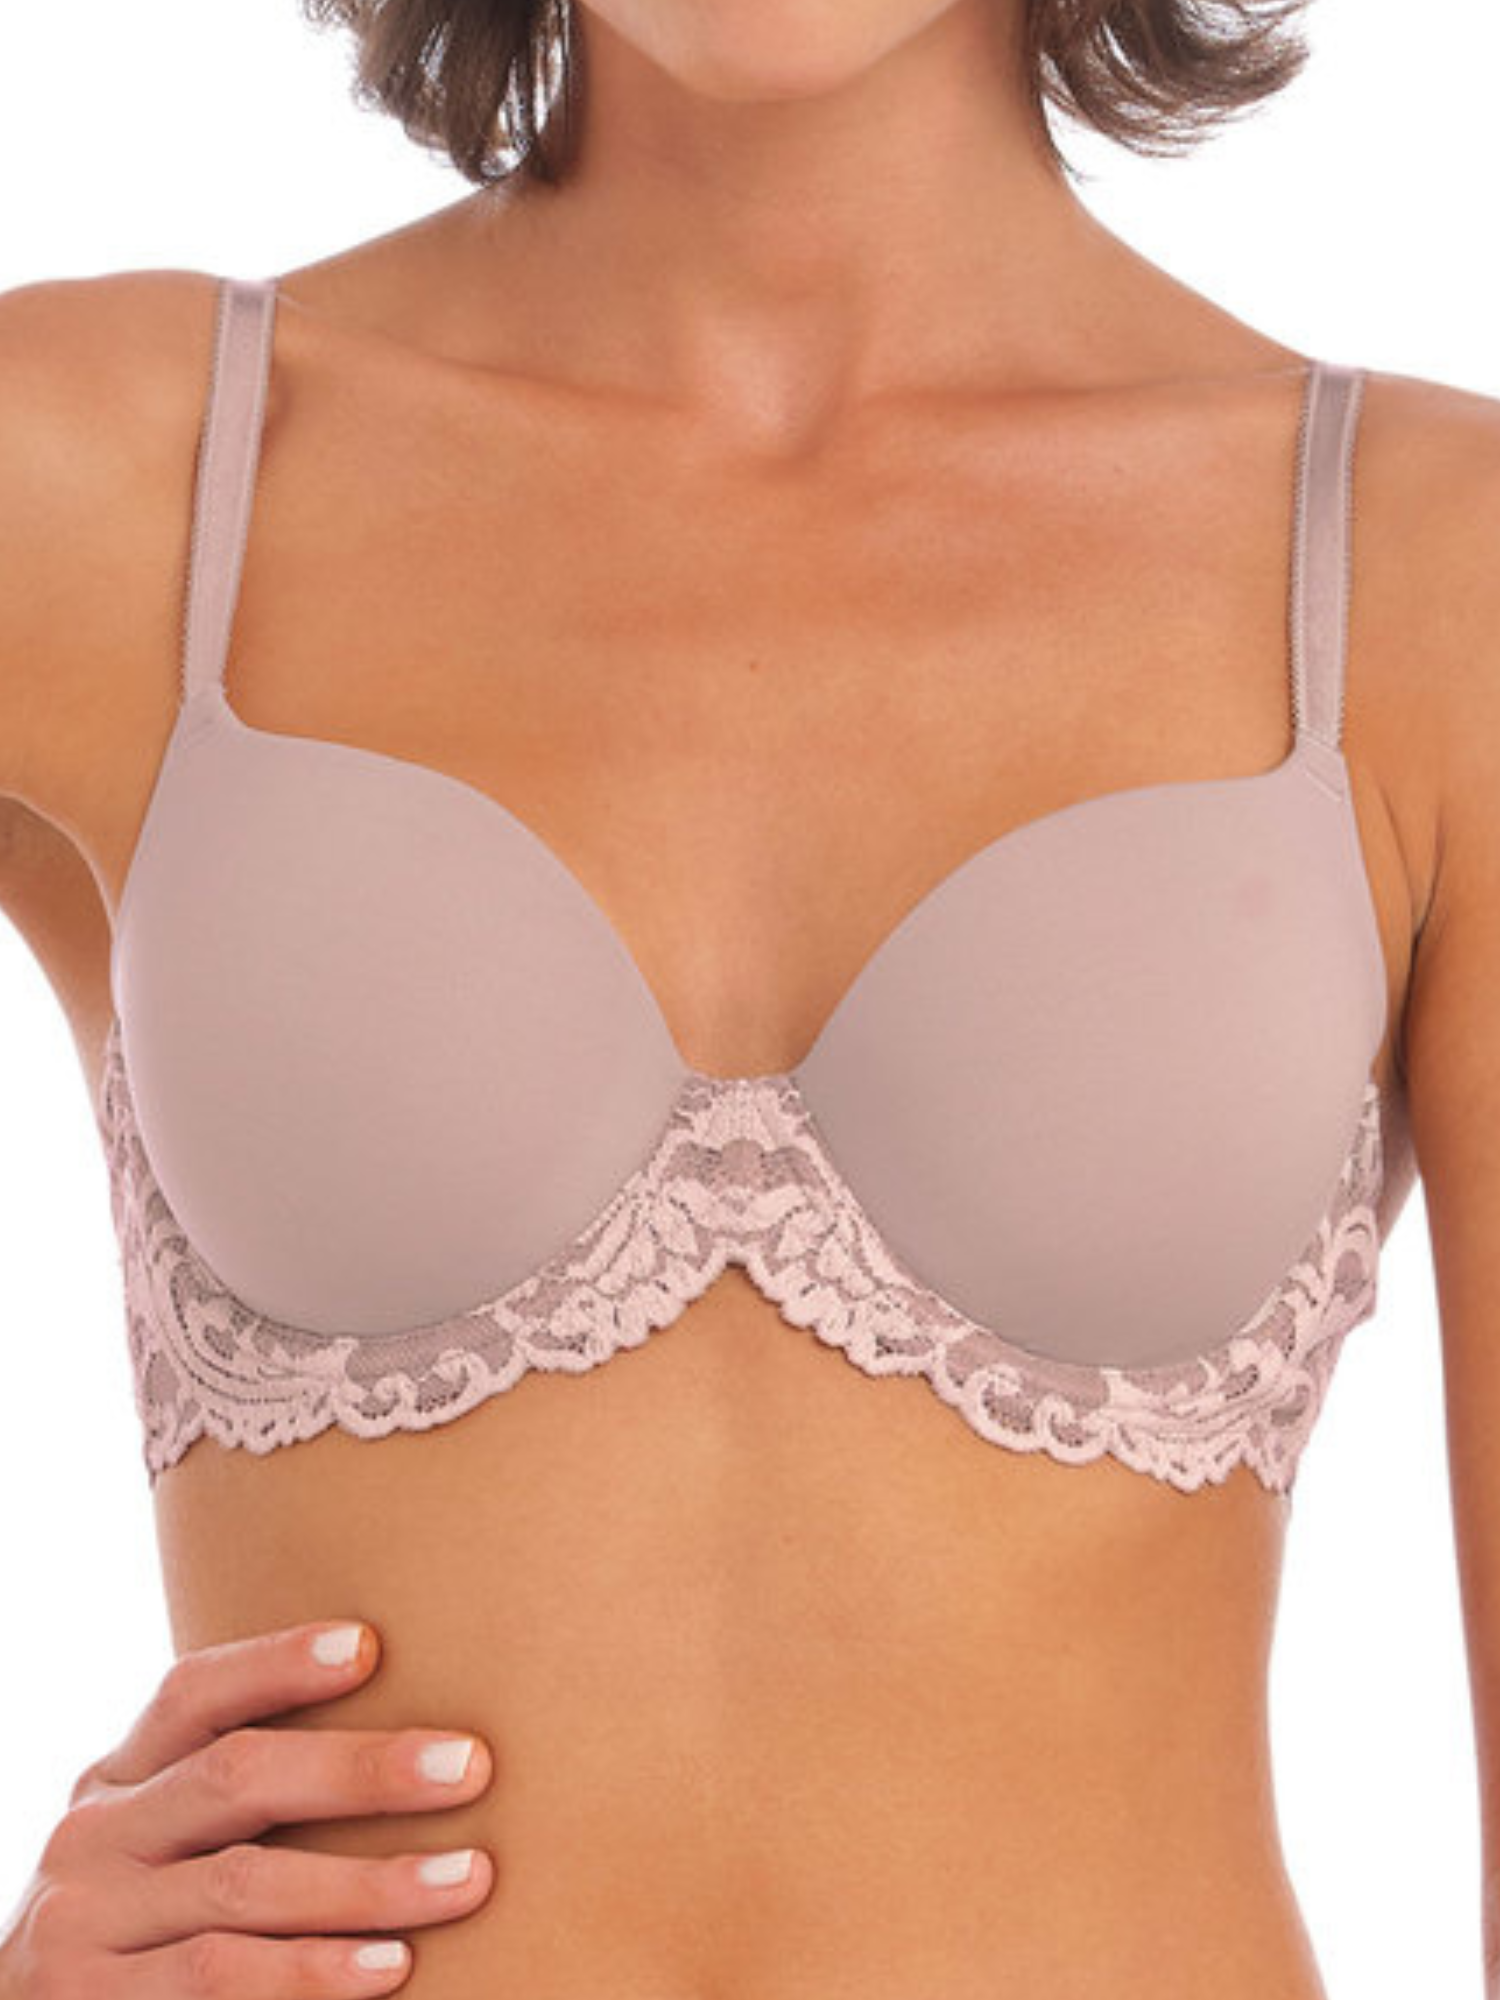 Buy Wacoal Women's Ultimate Side Smoother Contour Bra, Sand, 30D at